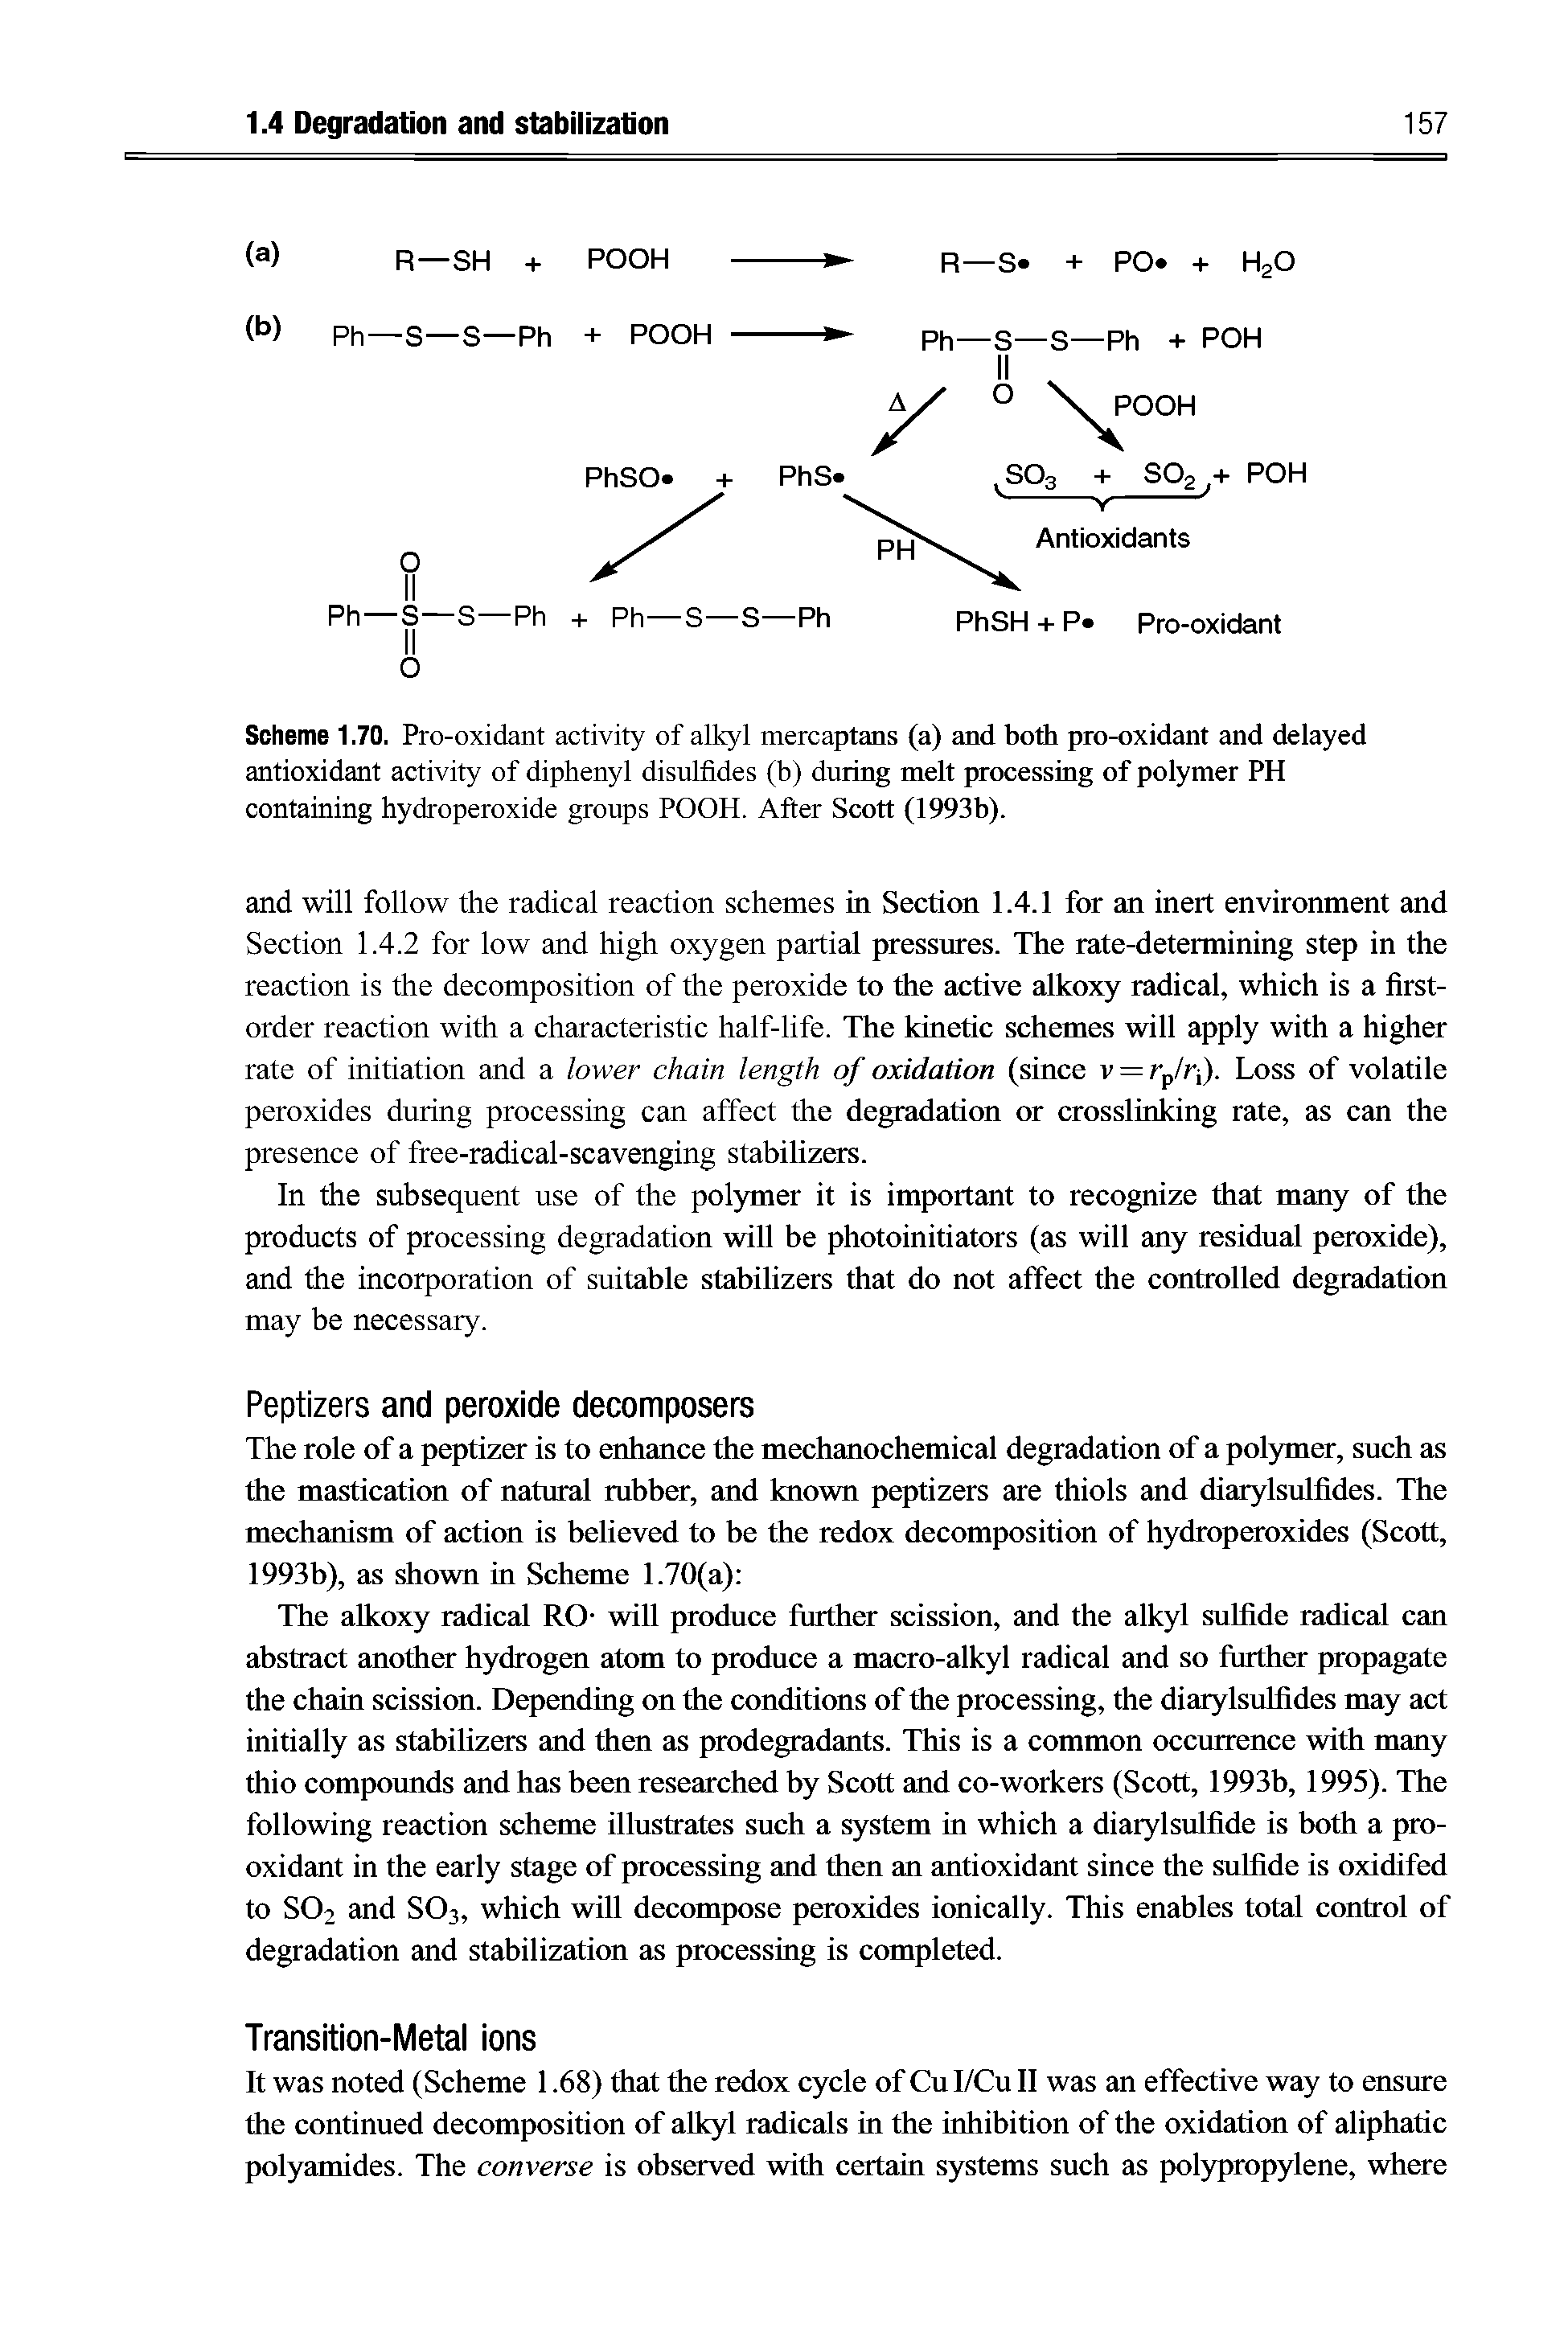 Scheme 1.70. Pro-oxidant activity of alkyl mercaptans (a) and both pro-oxidant and delayed antioxidant activity of diphenyl disulfides (b) during melt processing of polymer PH containing hydroperoxide groups POOH. After Scott (1993b).